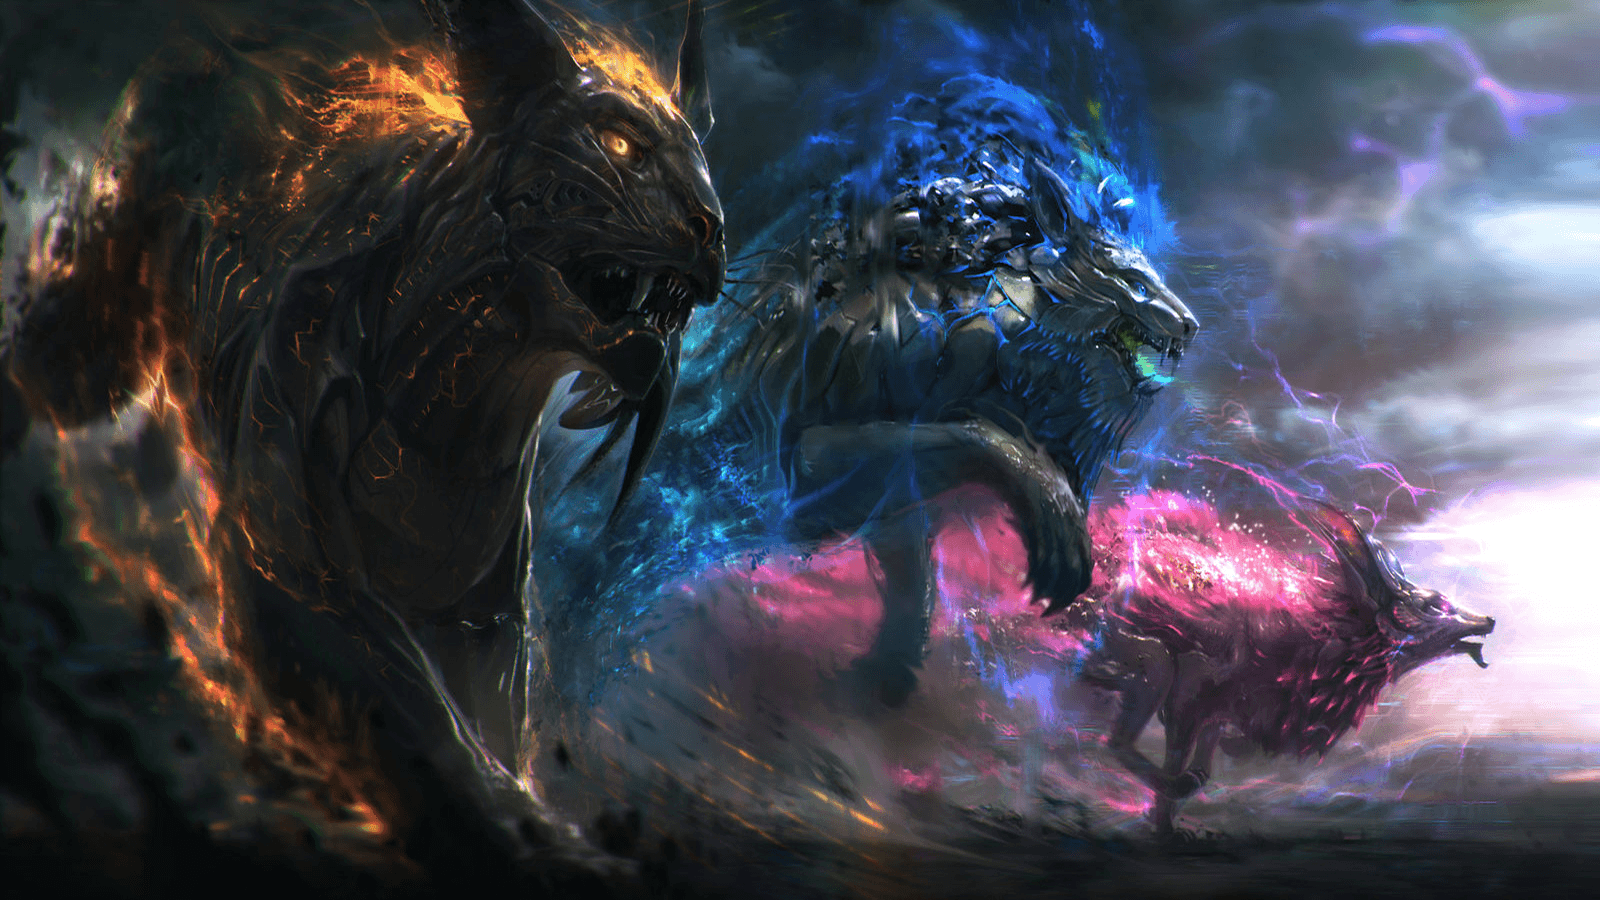 Mythical Creatures Wallpapers 2560x1600.